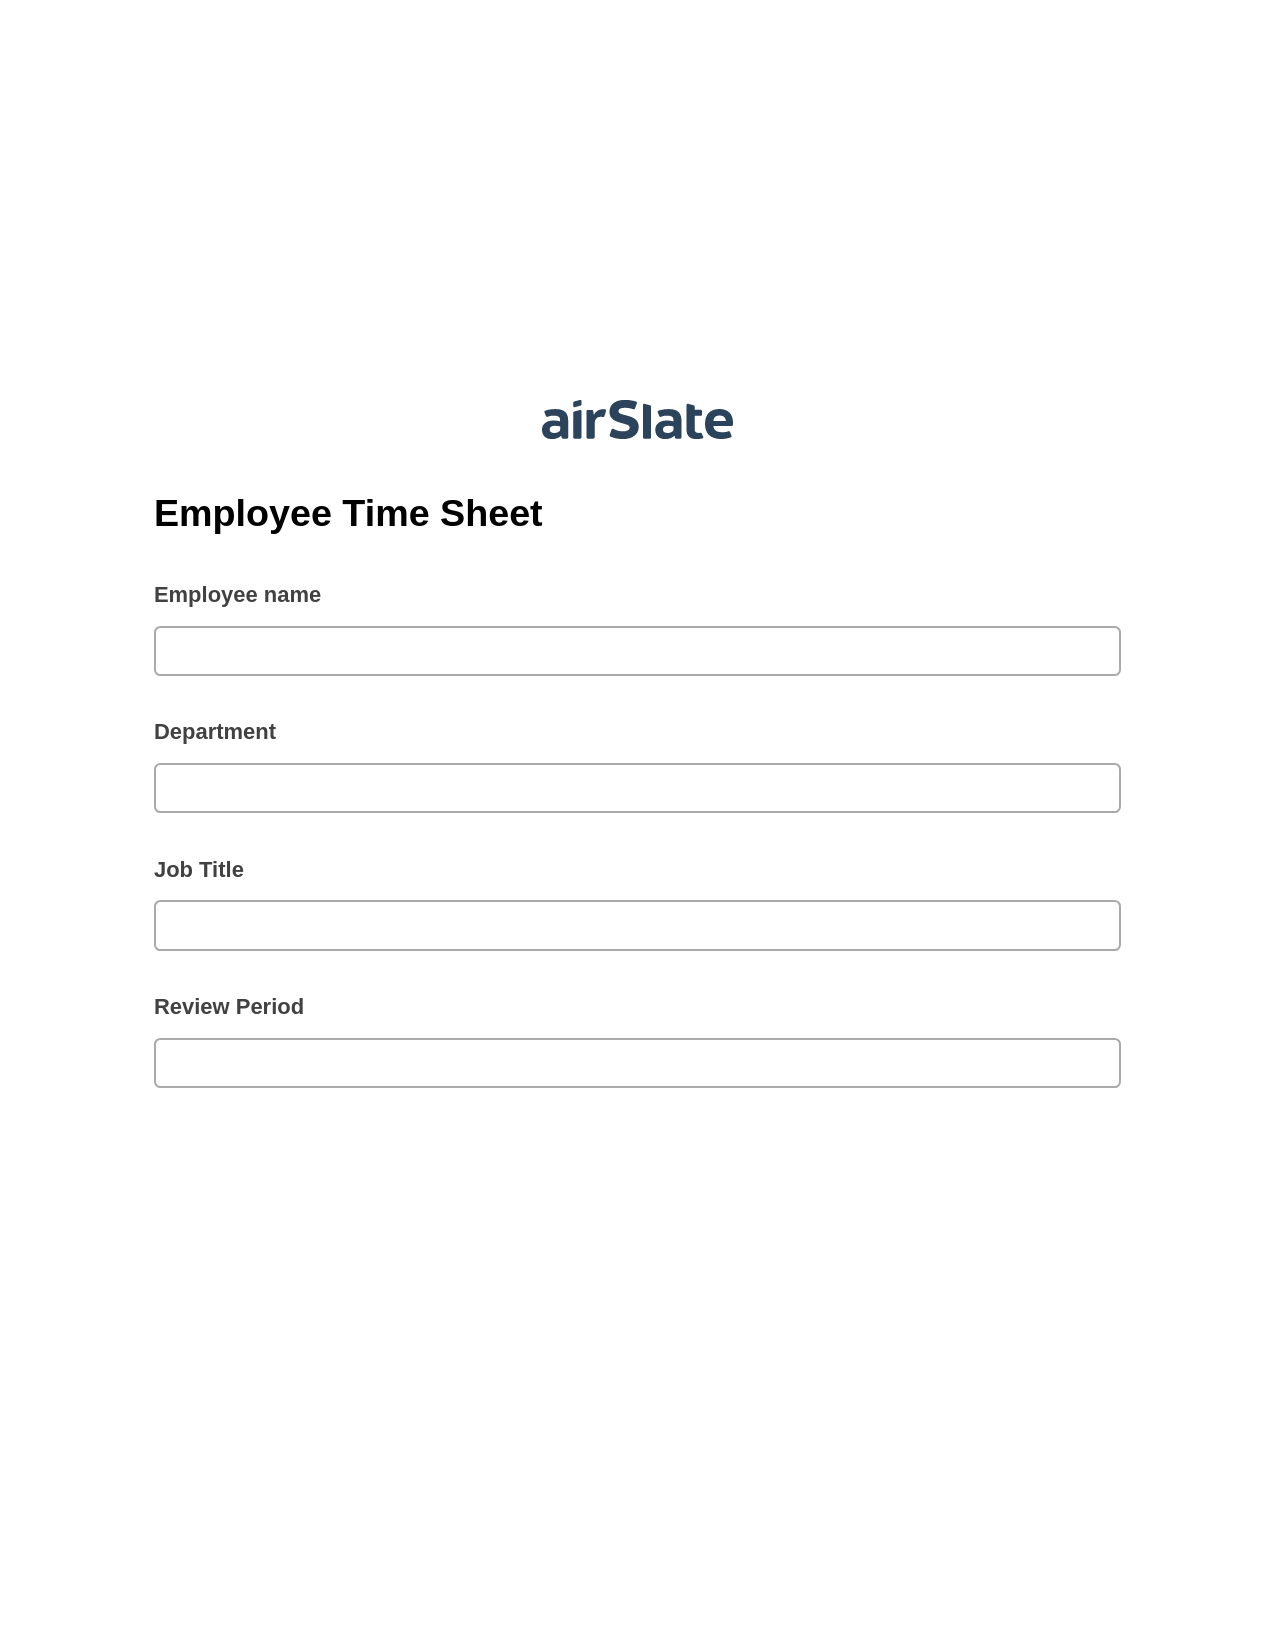 Employee Time Sheet Prefill from NetSuite records, Create slate addon, Archive to Box Bot